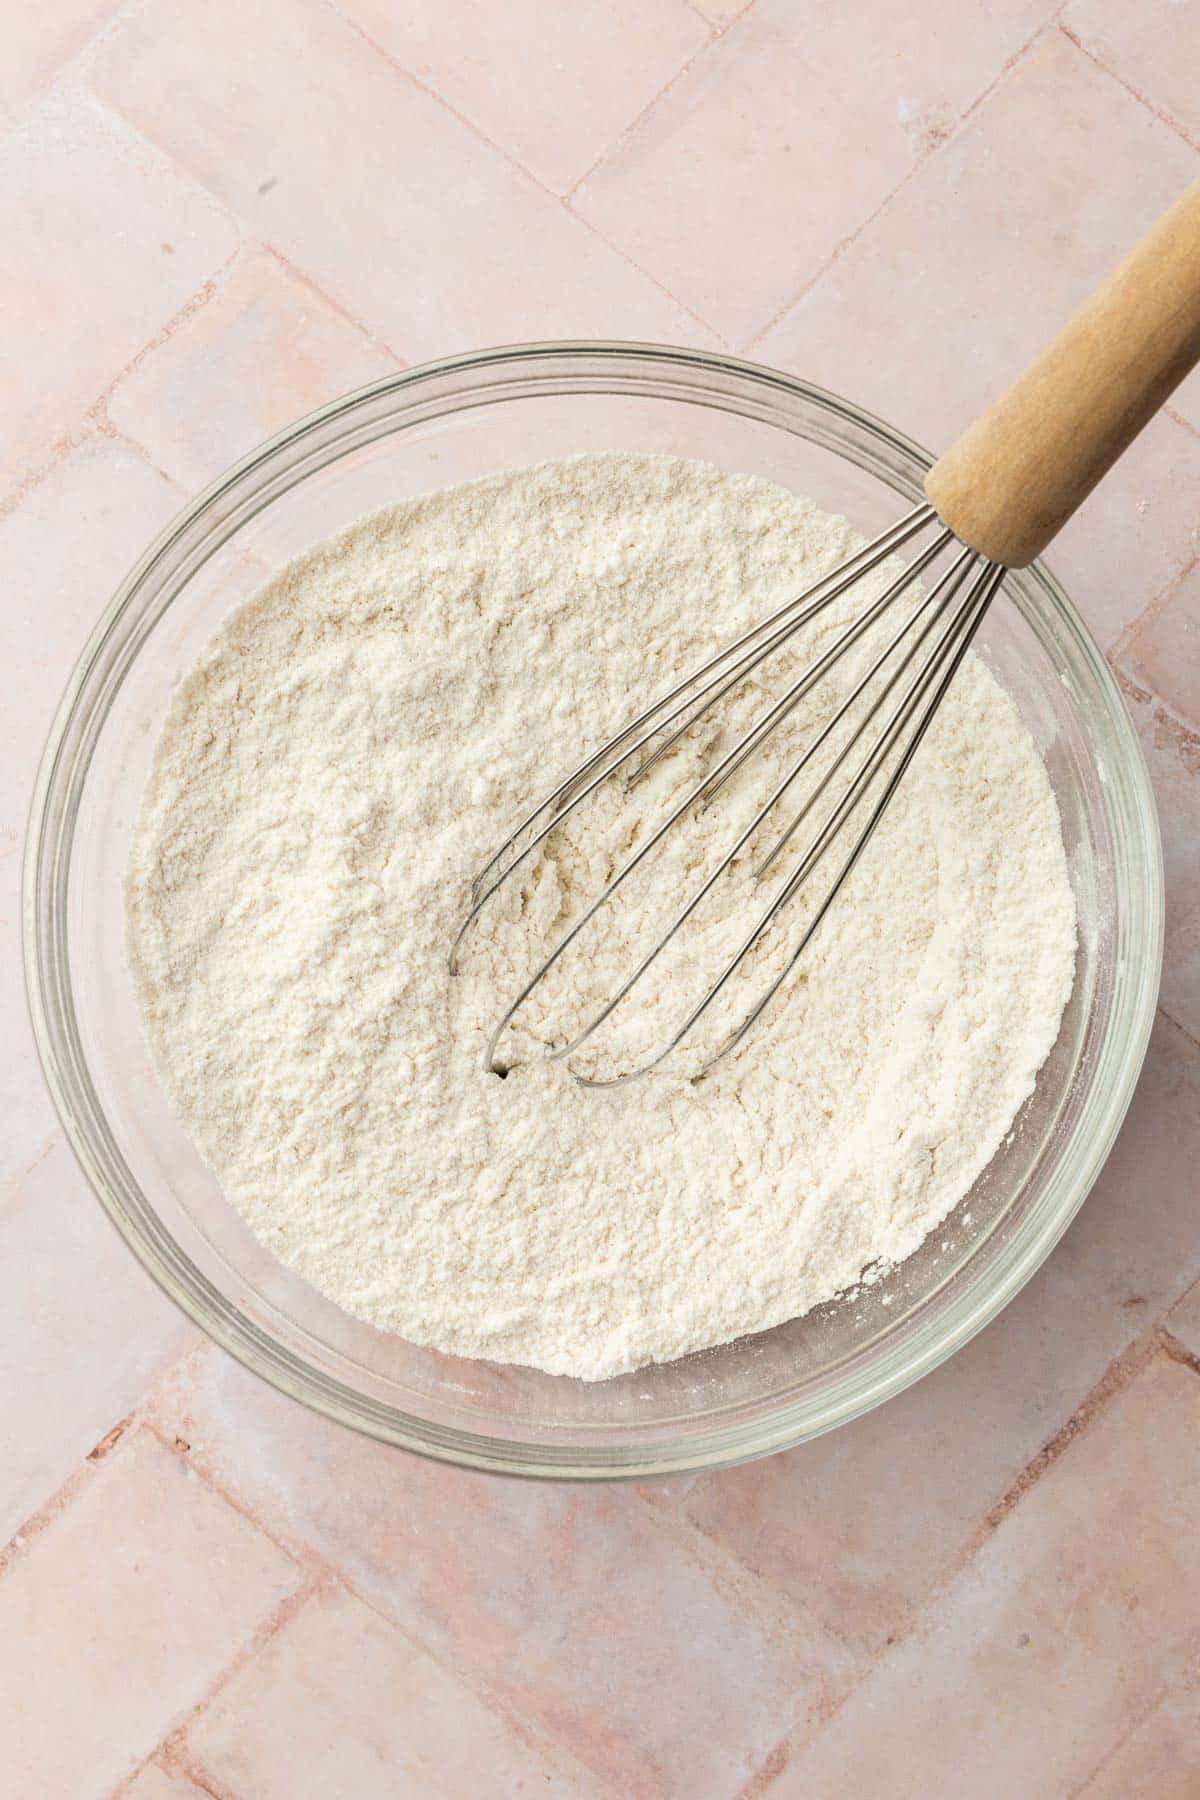 A glass mixing bowl with a gluten-free flour blend in it with a whisk.